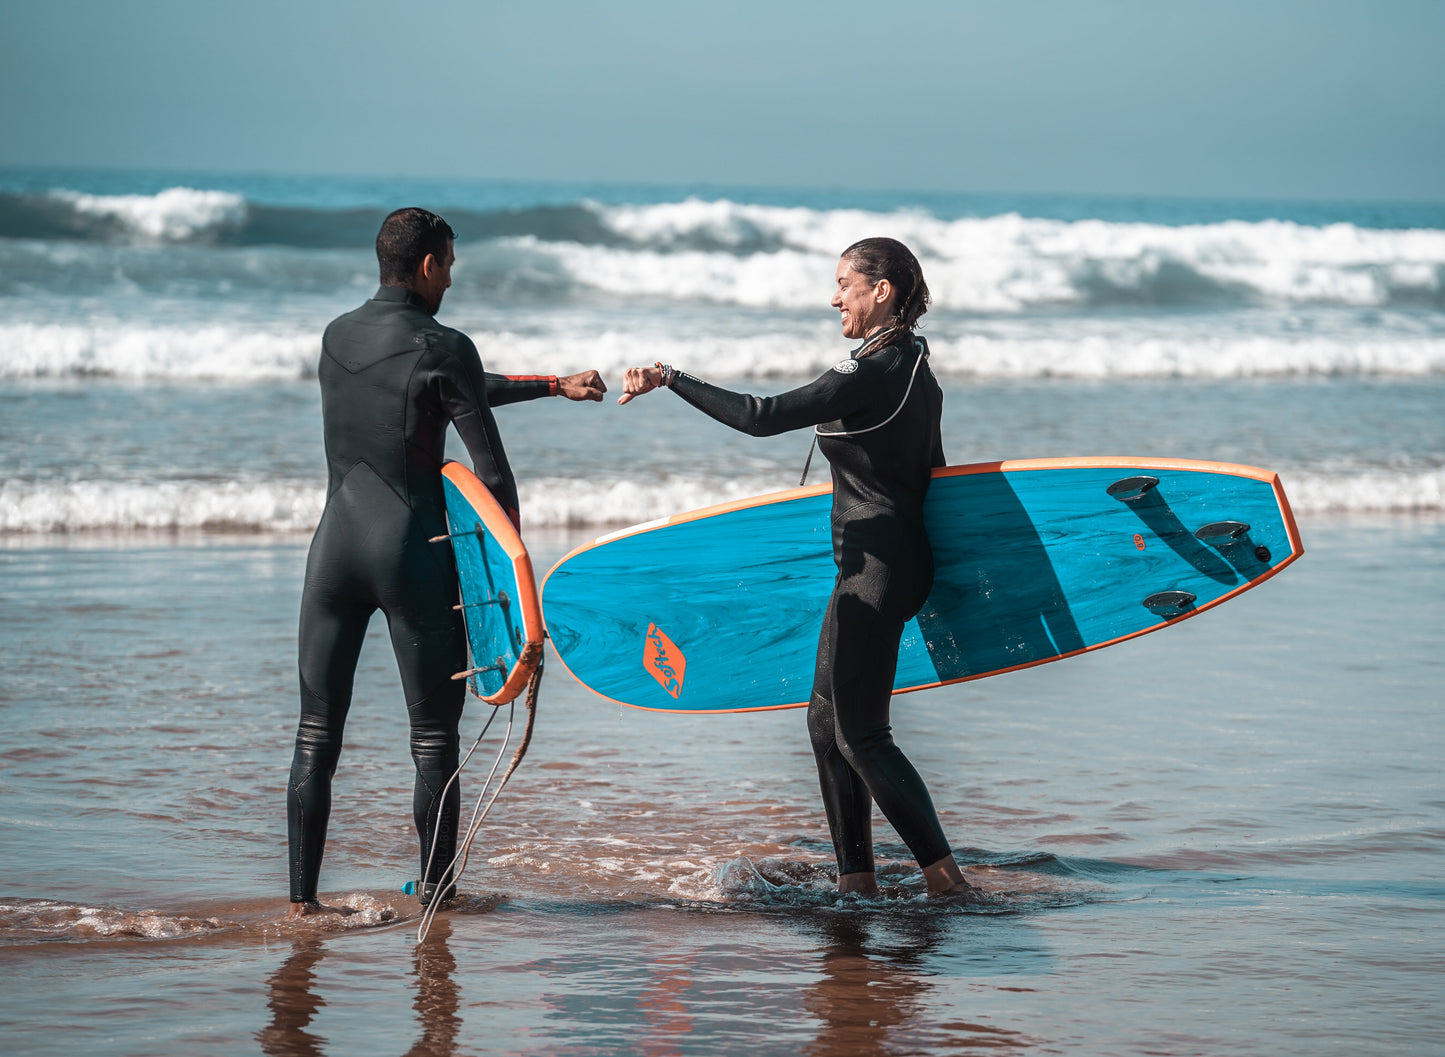 Two surfers fist bumping while holding their surf boards in the Taghazout shoreline.